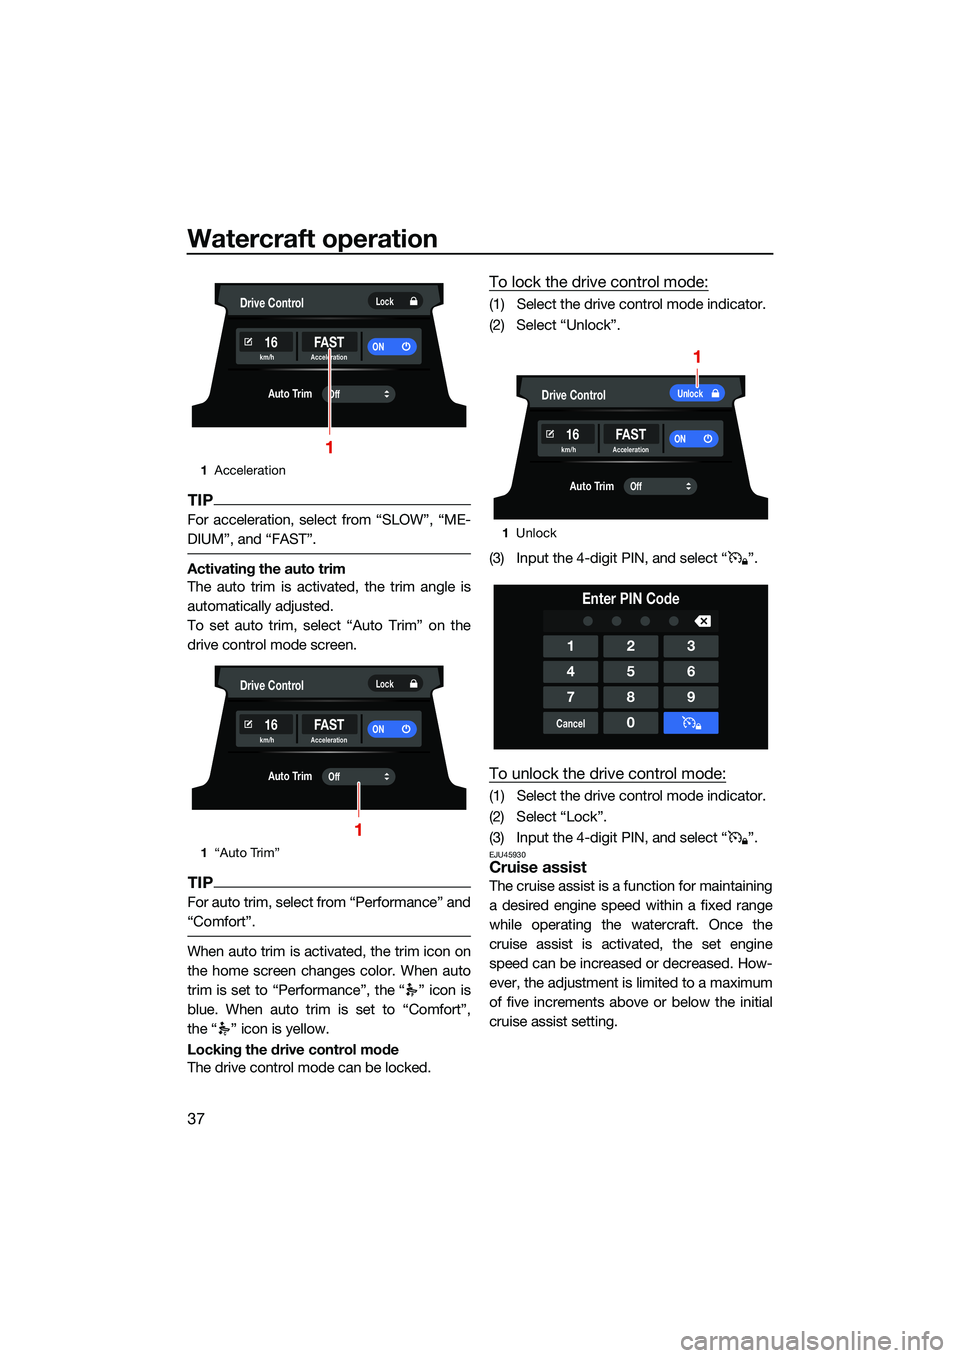 YAMAHA FX HO CRUISER 2022 Service Manual Watercraft operation
37
TIP
For acceleration, select from “SLOW”, “ME-
DIUM”, and “FAST”.
Activating the auto trim
The auto trim is activated, the trim angle is
automatically adjusted.
To 